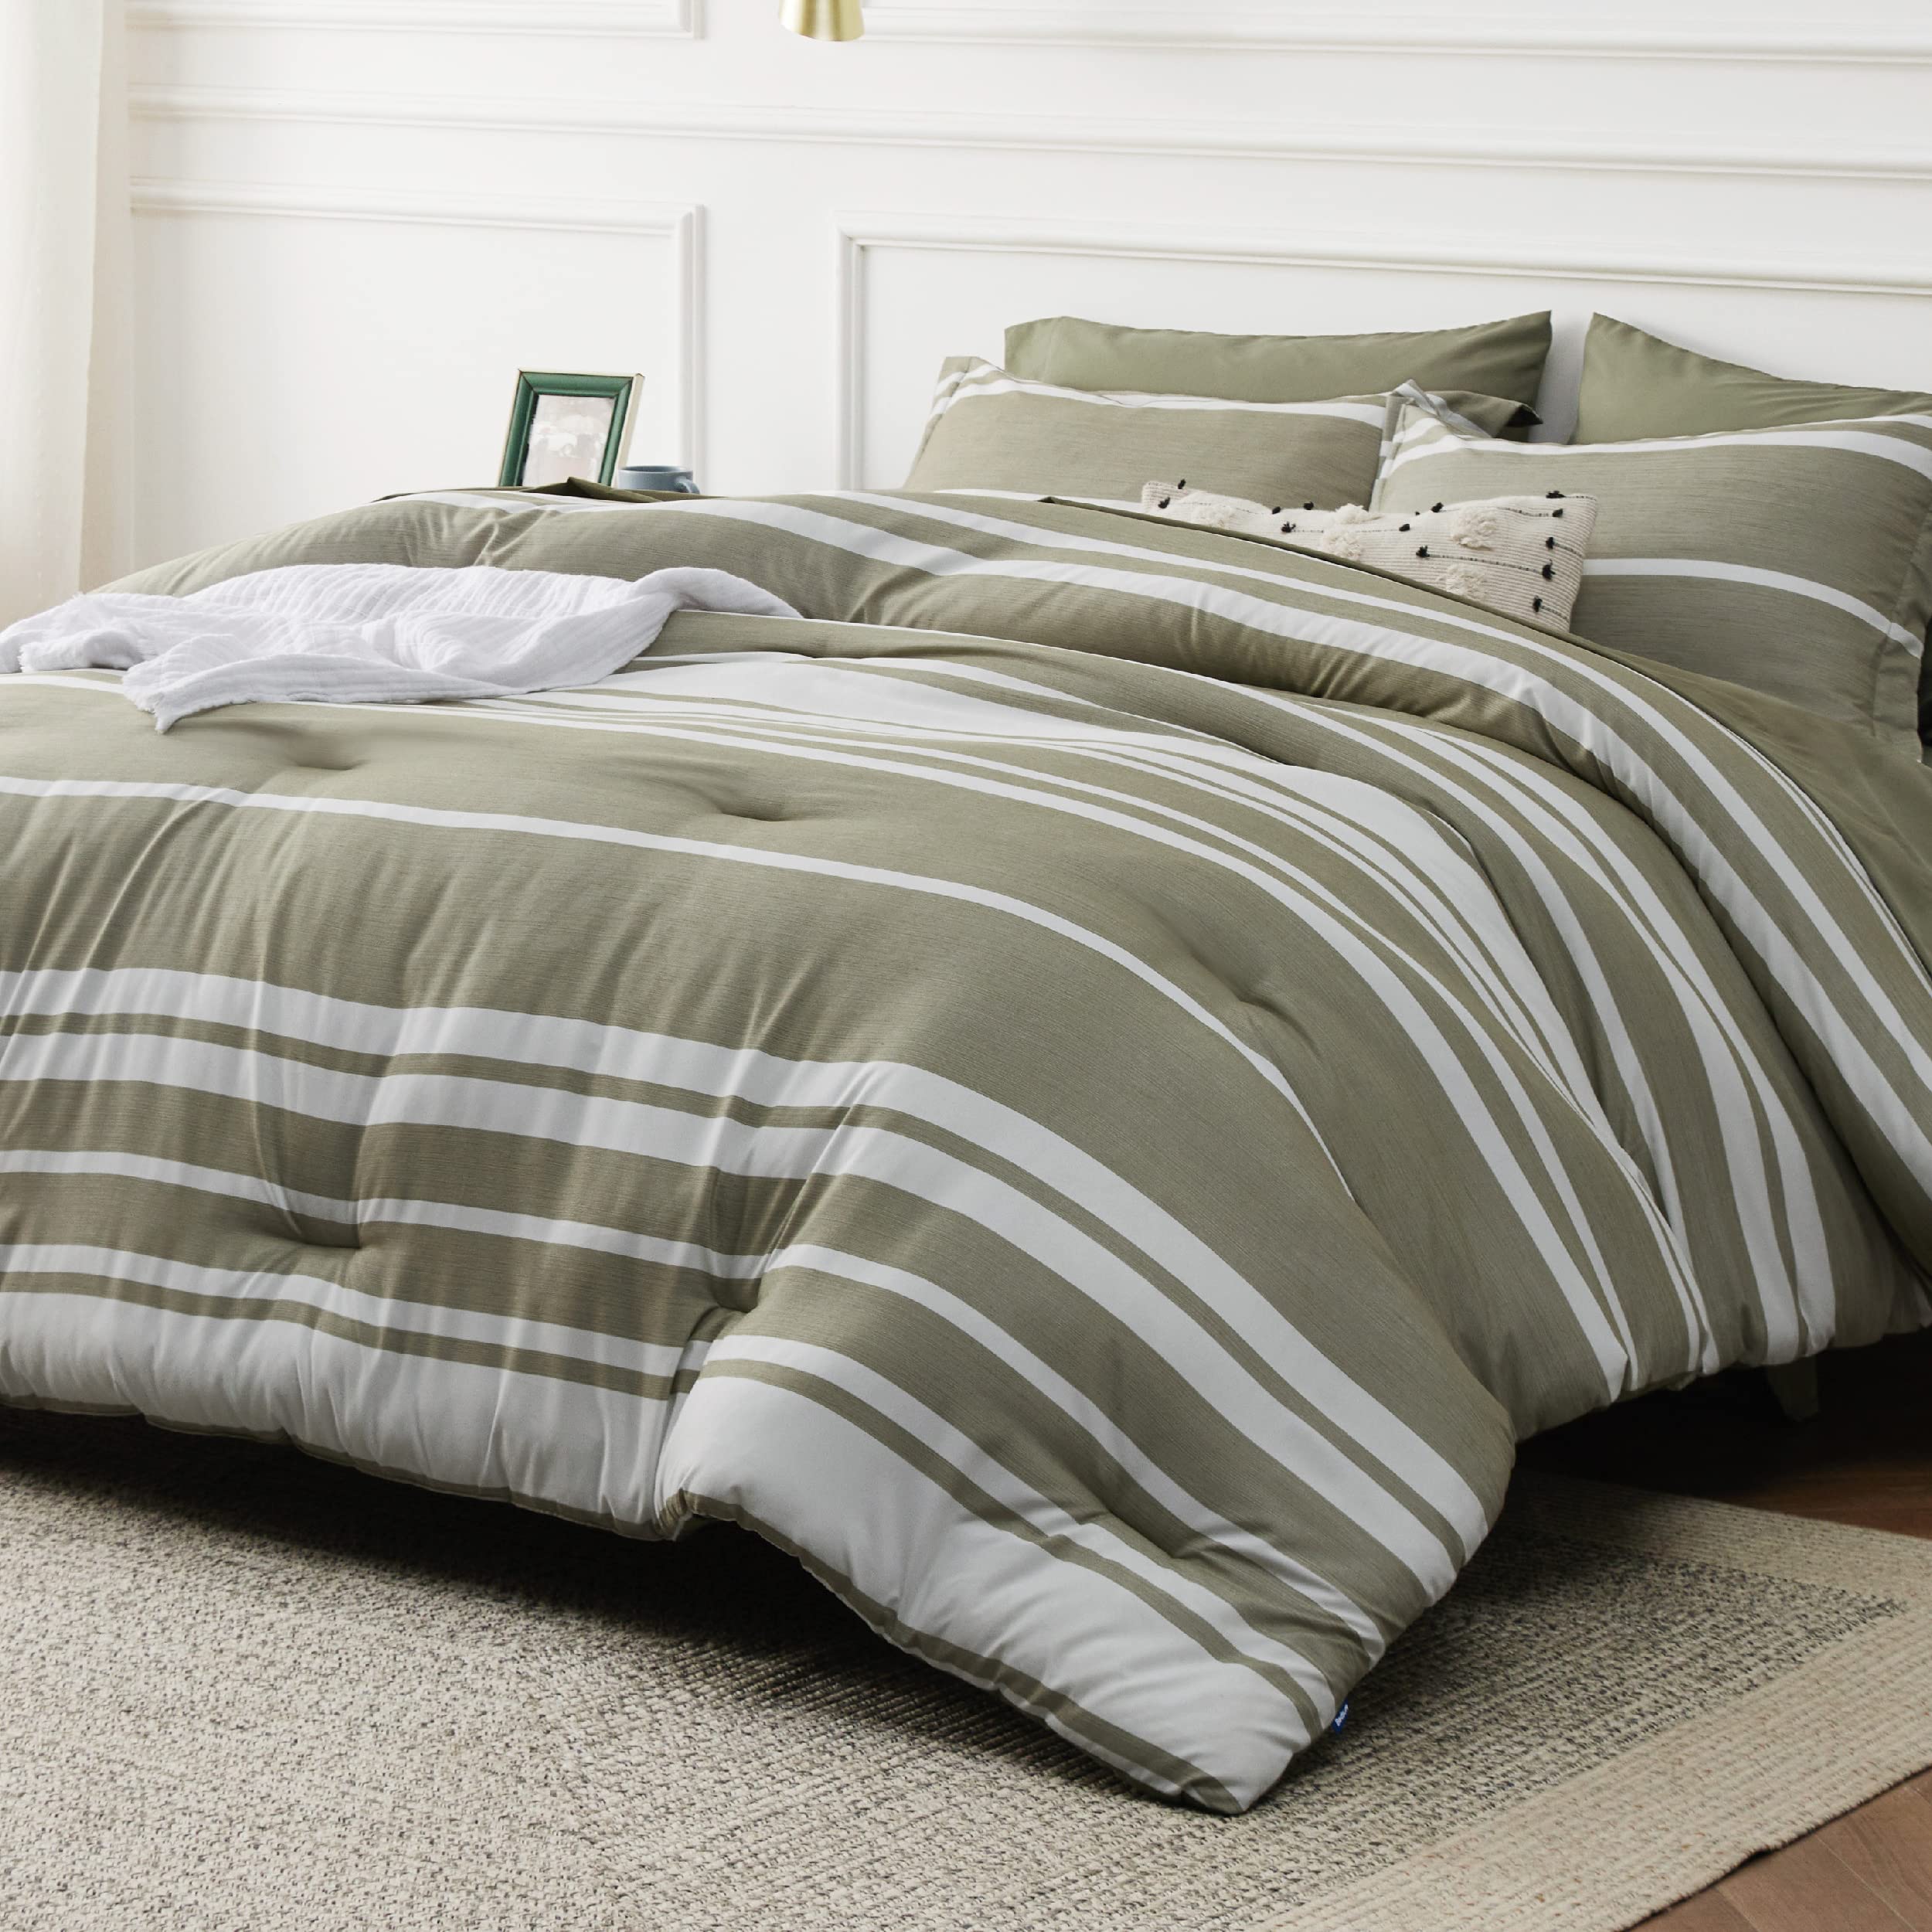 Bedsure Bed in a Bag Twin Size 5 Pieces, Olive Green White Striped Bedding Comforter Sets All Season Bed Set with 1 Pillow Sham,